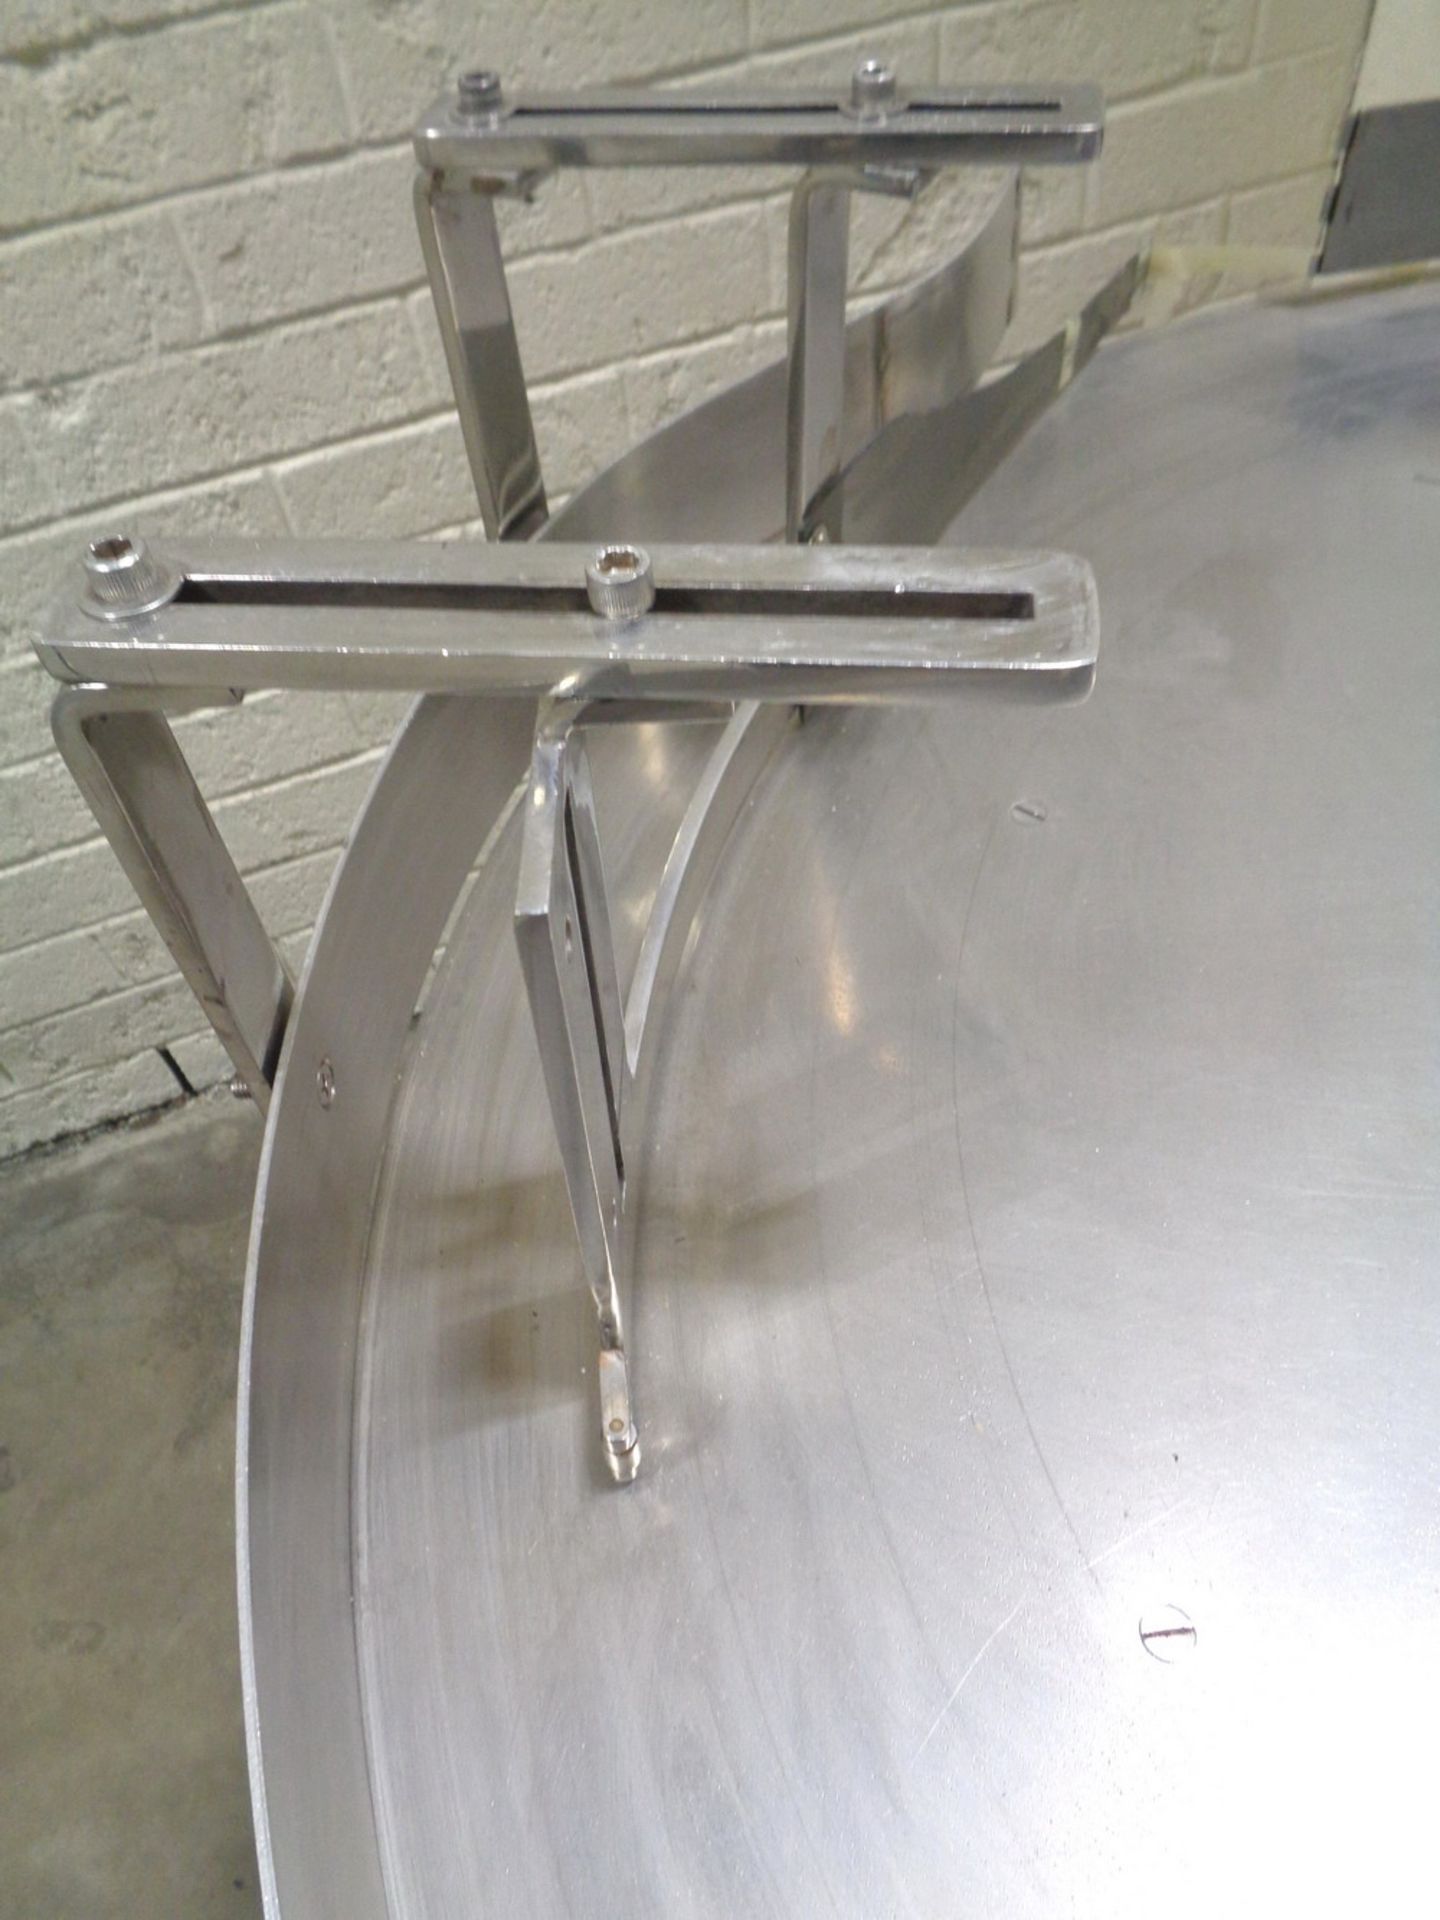 Anderson 42" SS Rotary Packaging Table - Image 3 of 4